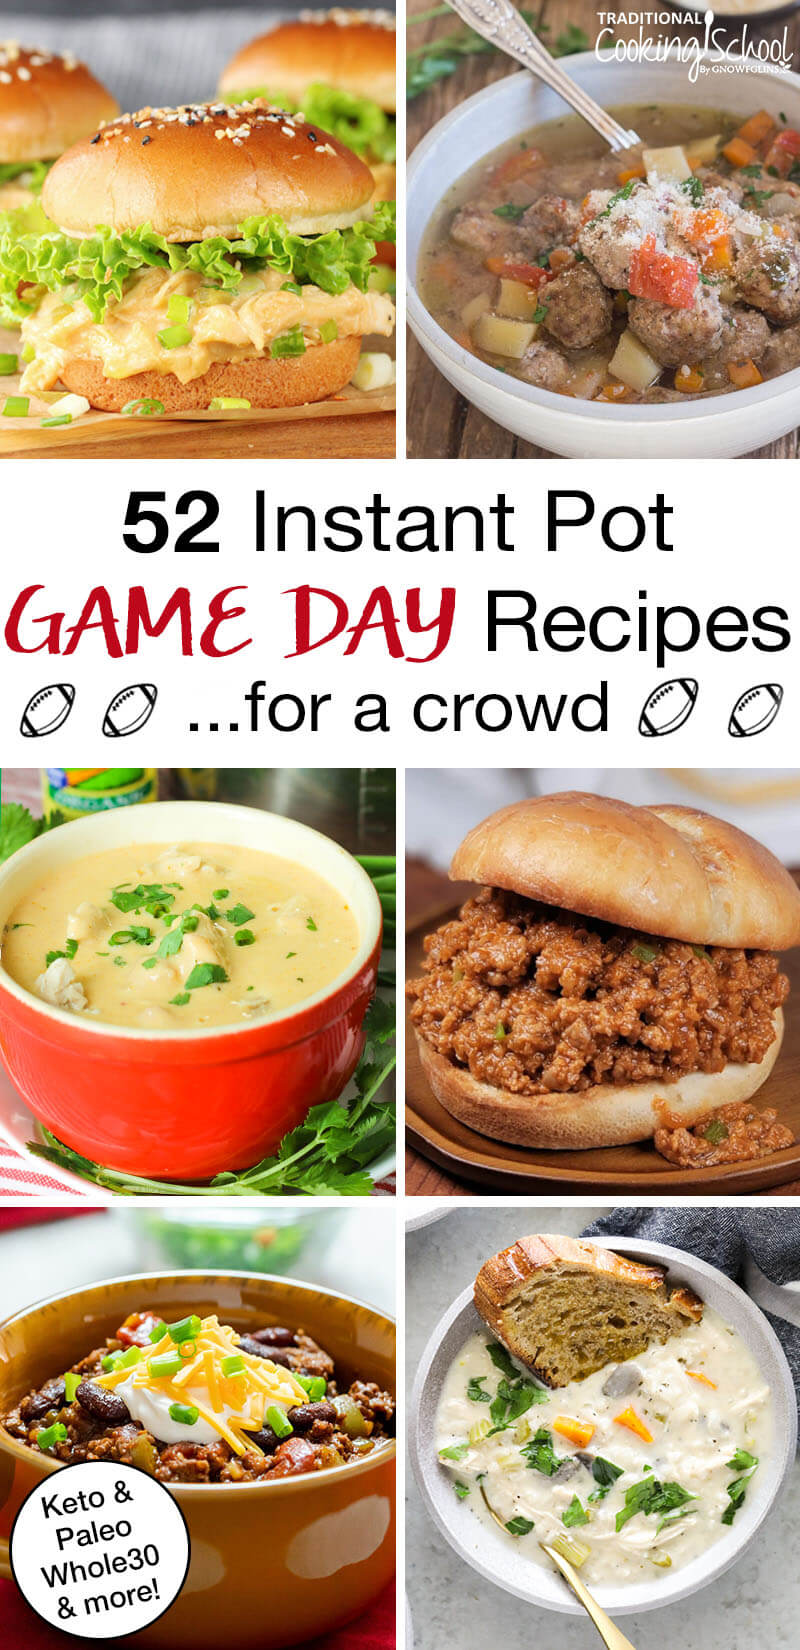 photo collage of healthy Instant Pot Super Bowl recipes, such as sloppy joes and chili, with text overlay: "52 Instant Pot Game Day Recipes For A Crowd (Keto, Paleo, Whole30, & more!)"